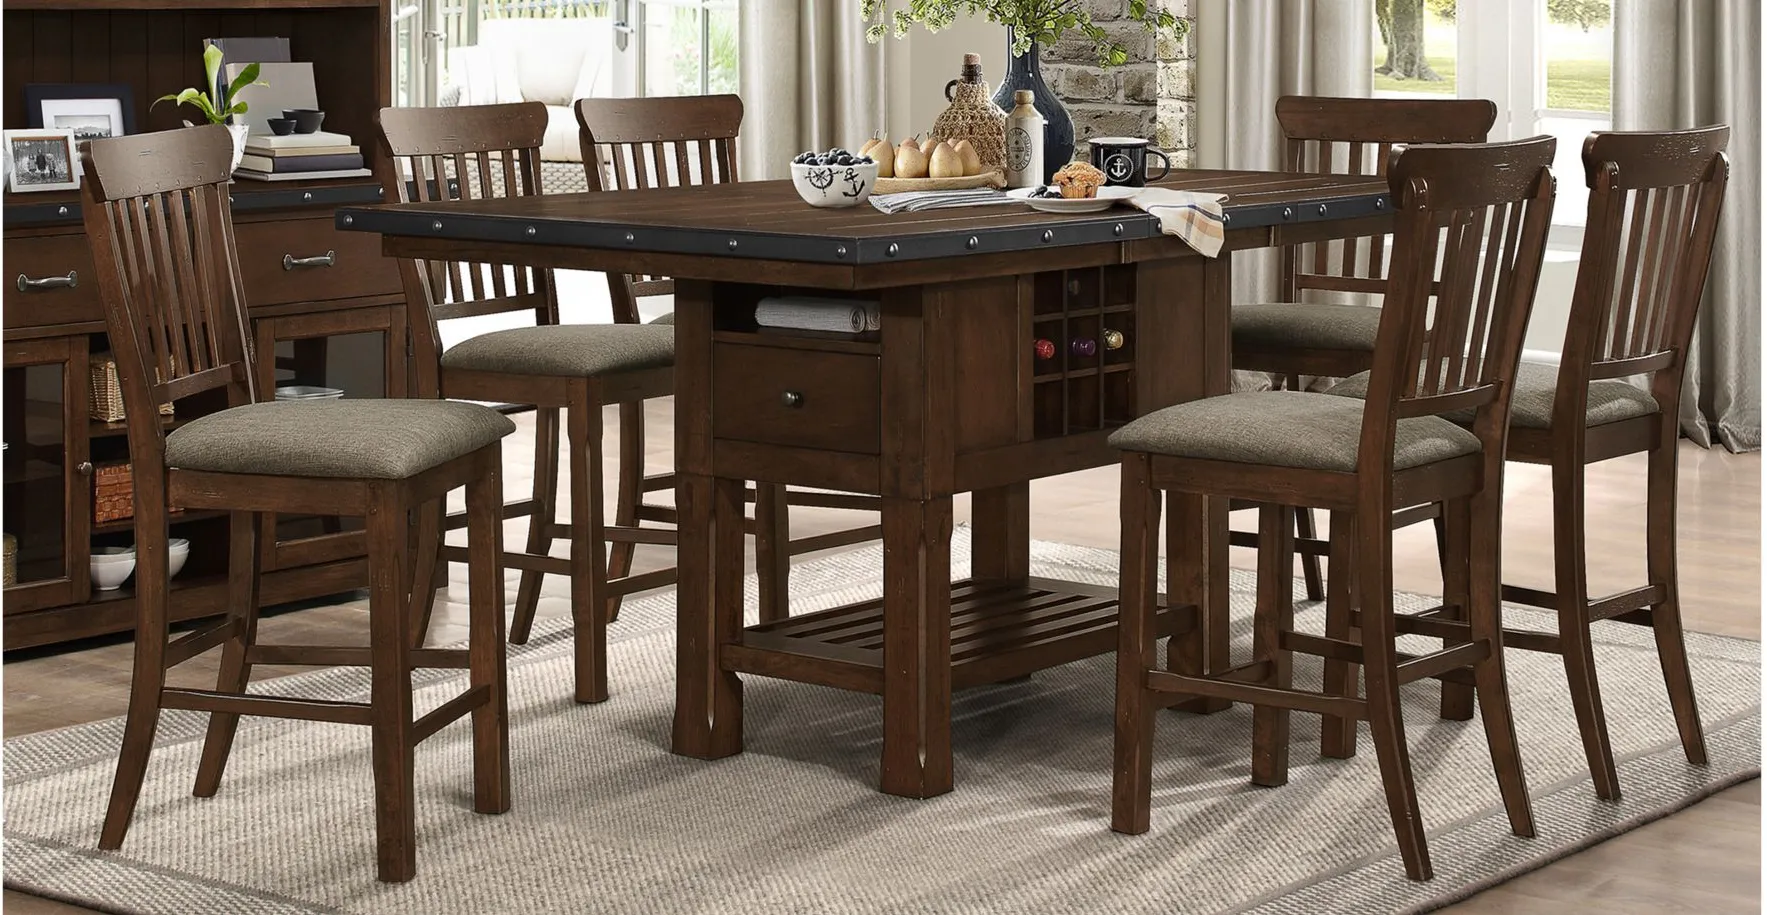 Blofeld 7-pc. Counter Height Dining Set in Dark Brown by Homelegance